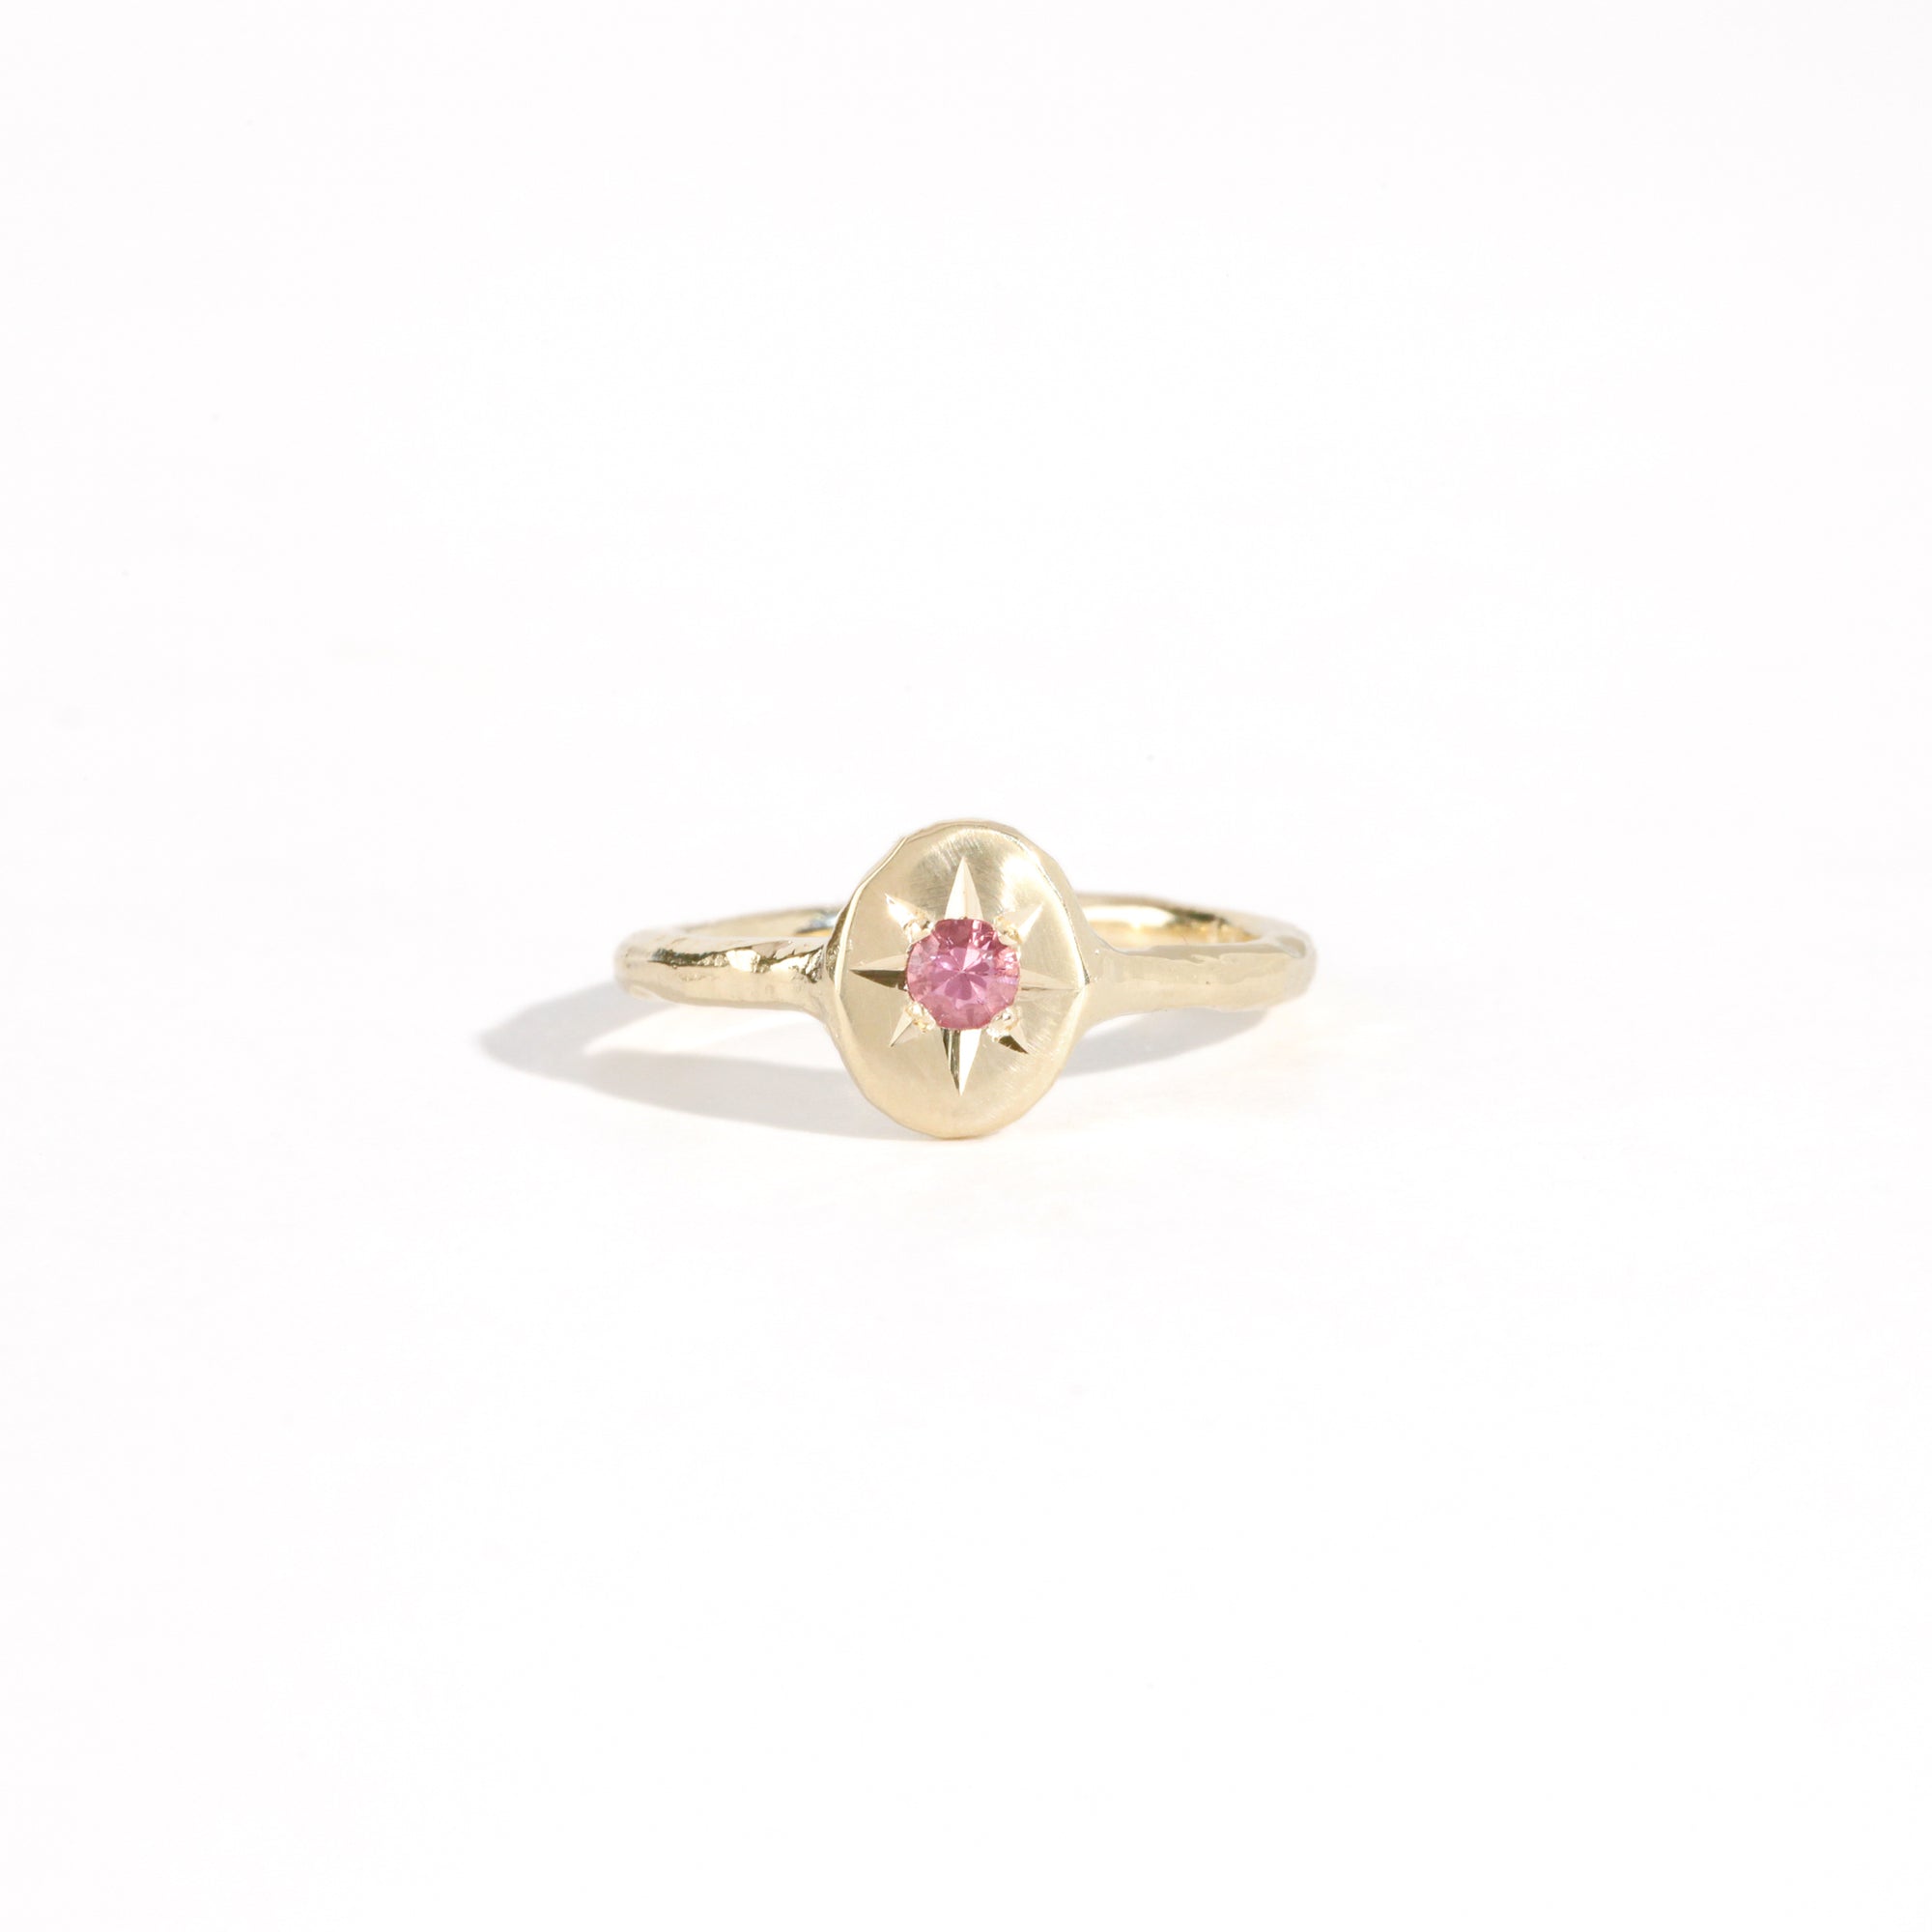 9ct yellow gold signet ring with star set pink sapphire in centre. Bespoke and handmade in Melbourne by Black Finch Jewellery